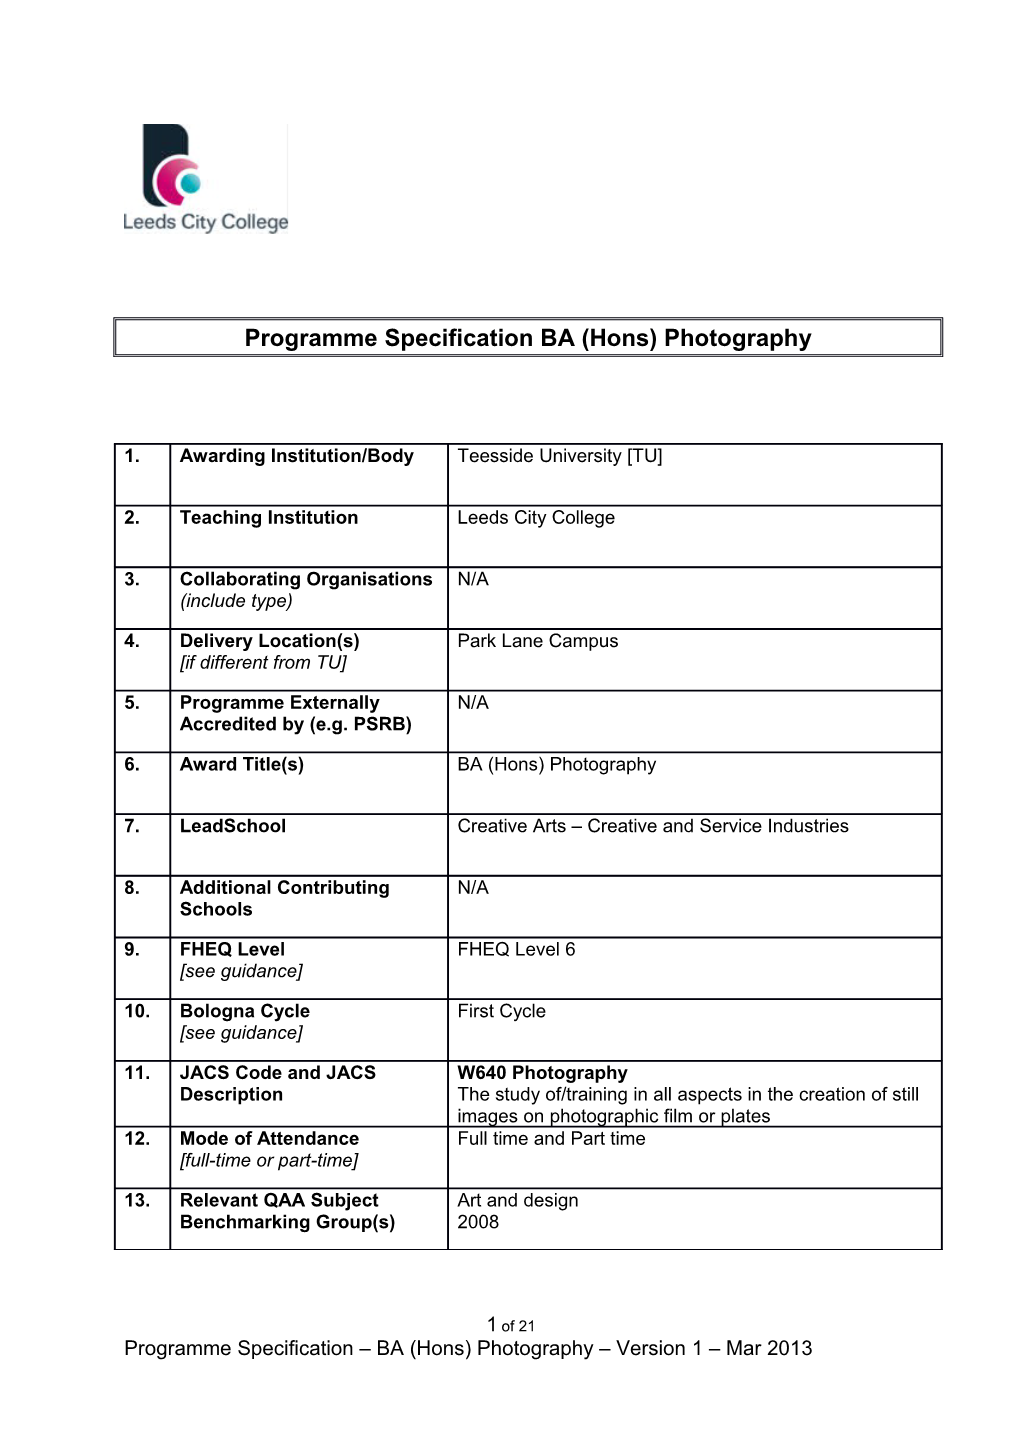 Programme Specification BA (Hons) Photography